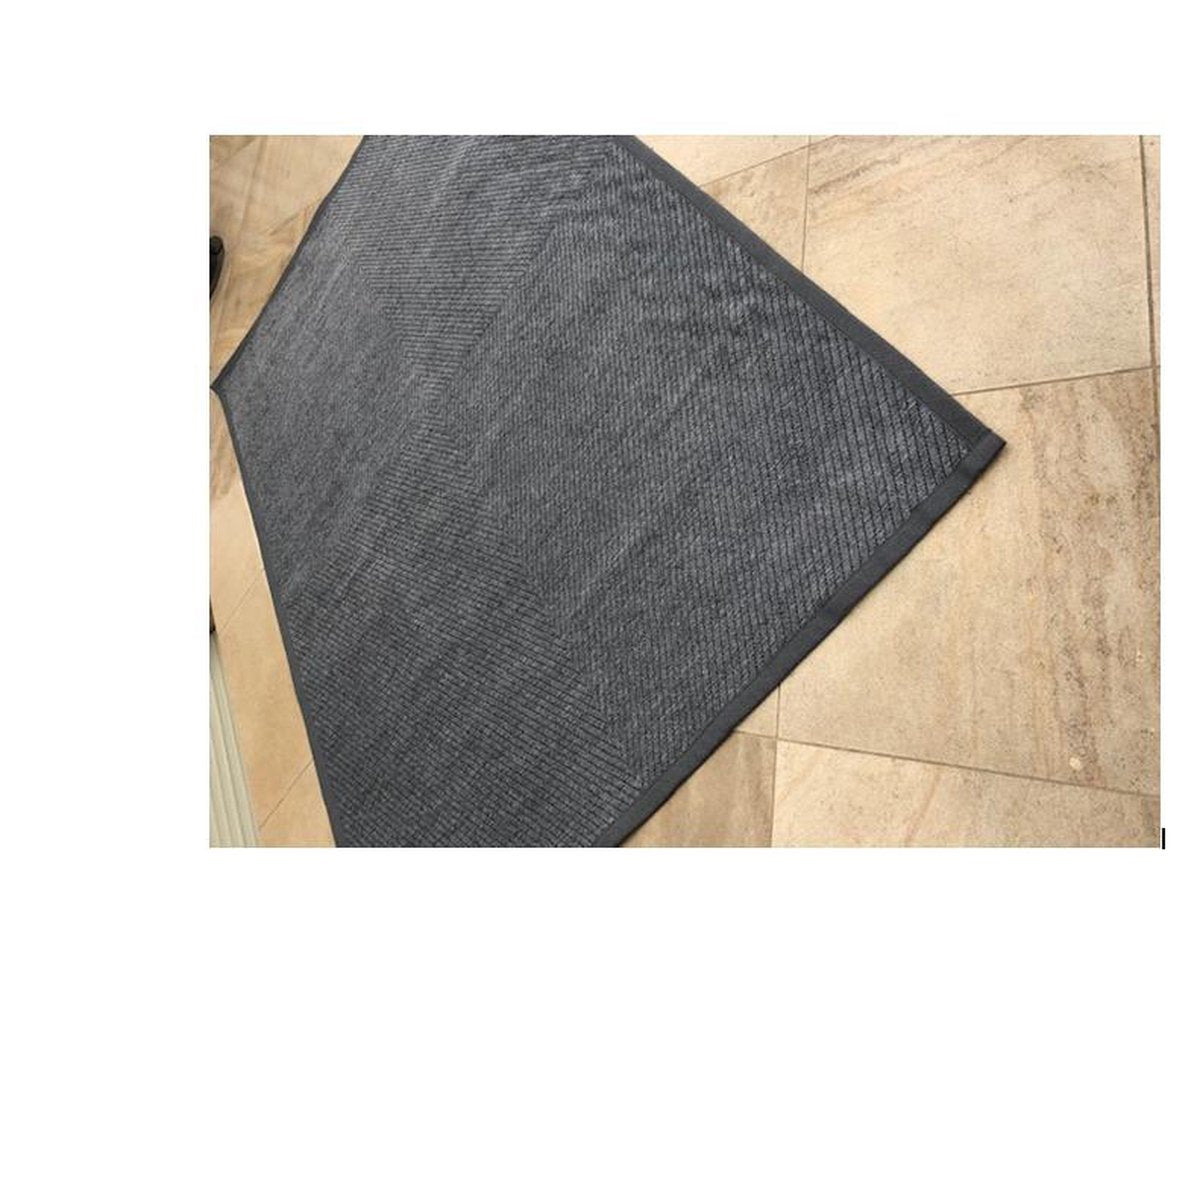 Exclusive Rug Viva recto verso - two-sided rug - free anti-slip included - light gray silver - 160/230 cm - carpet - striped and herringbone